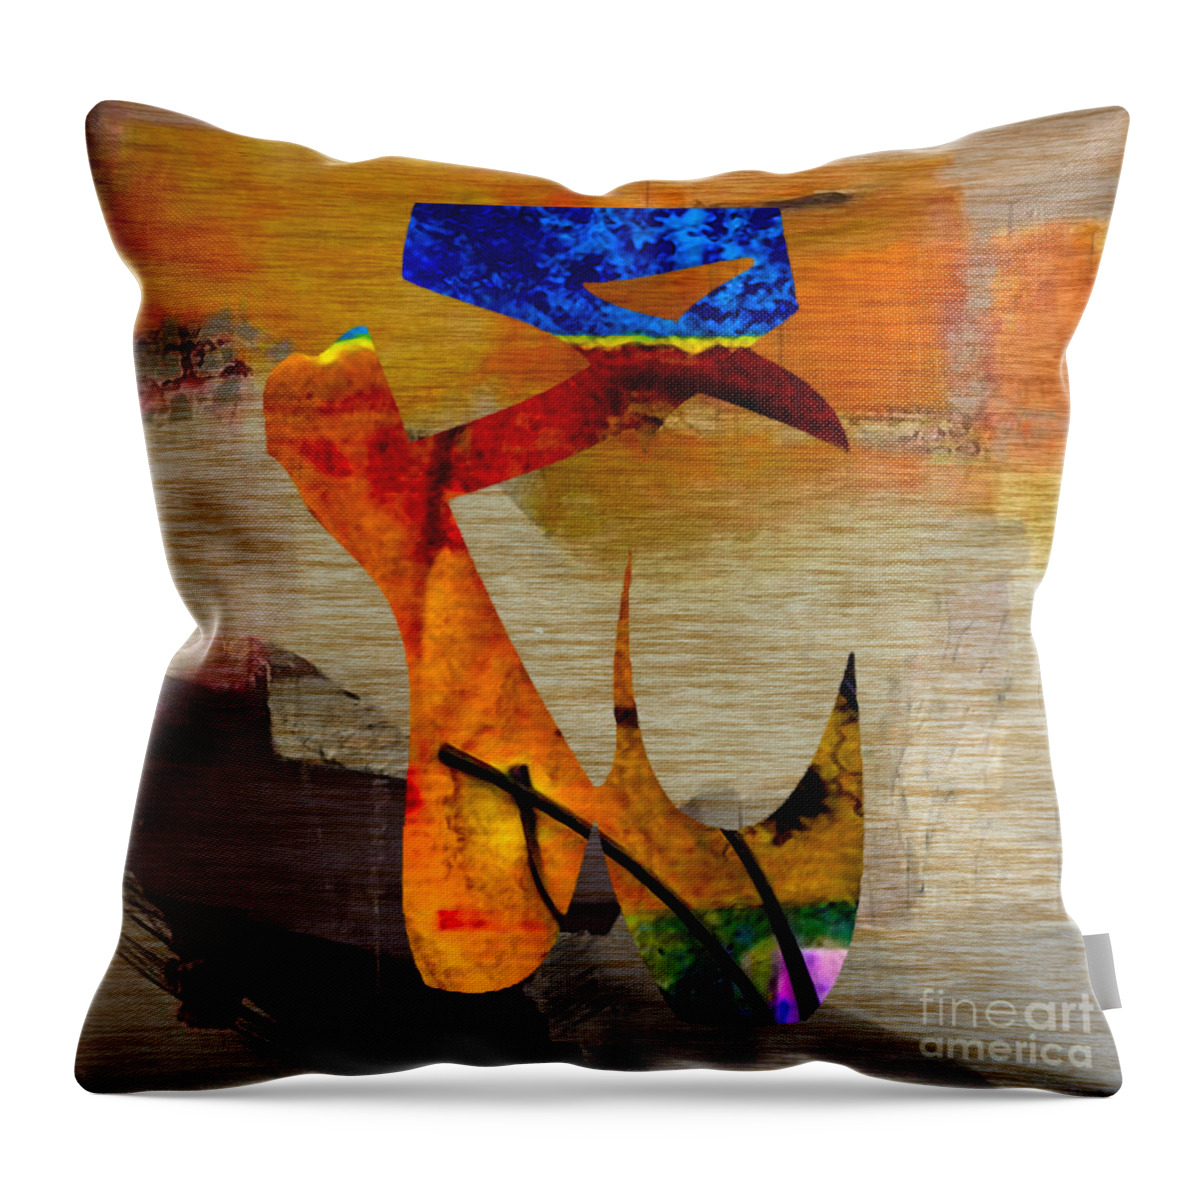 Ballet Digital Art Throw Pillow featuring the mixed media Ballet Slippers by Marvin Blaine